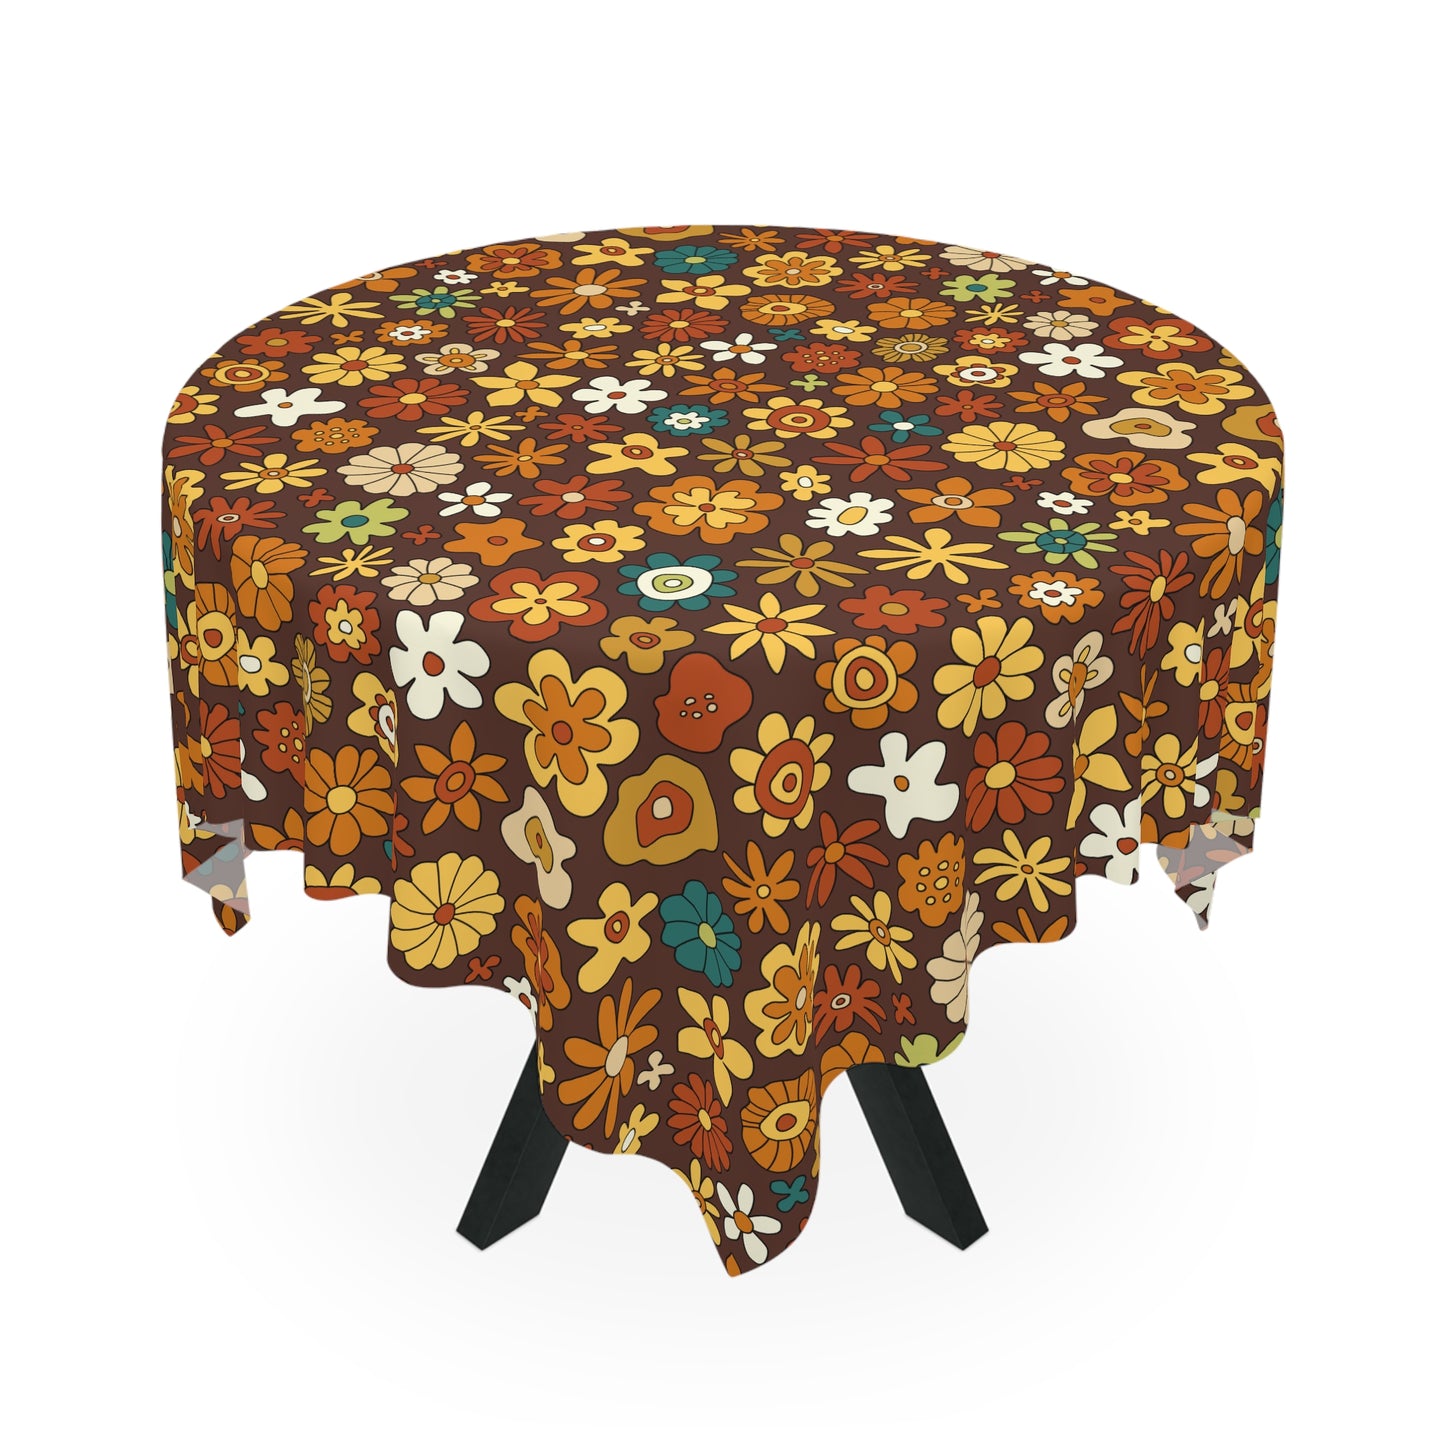 Retro 60s 70s Groovy Floral Mid Century Modern Brown Tablecloth